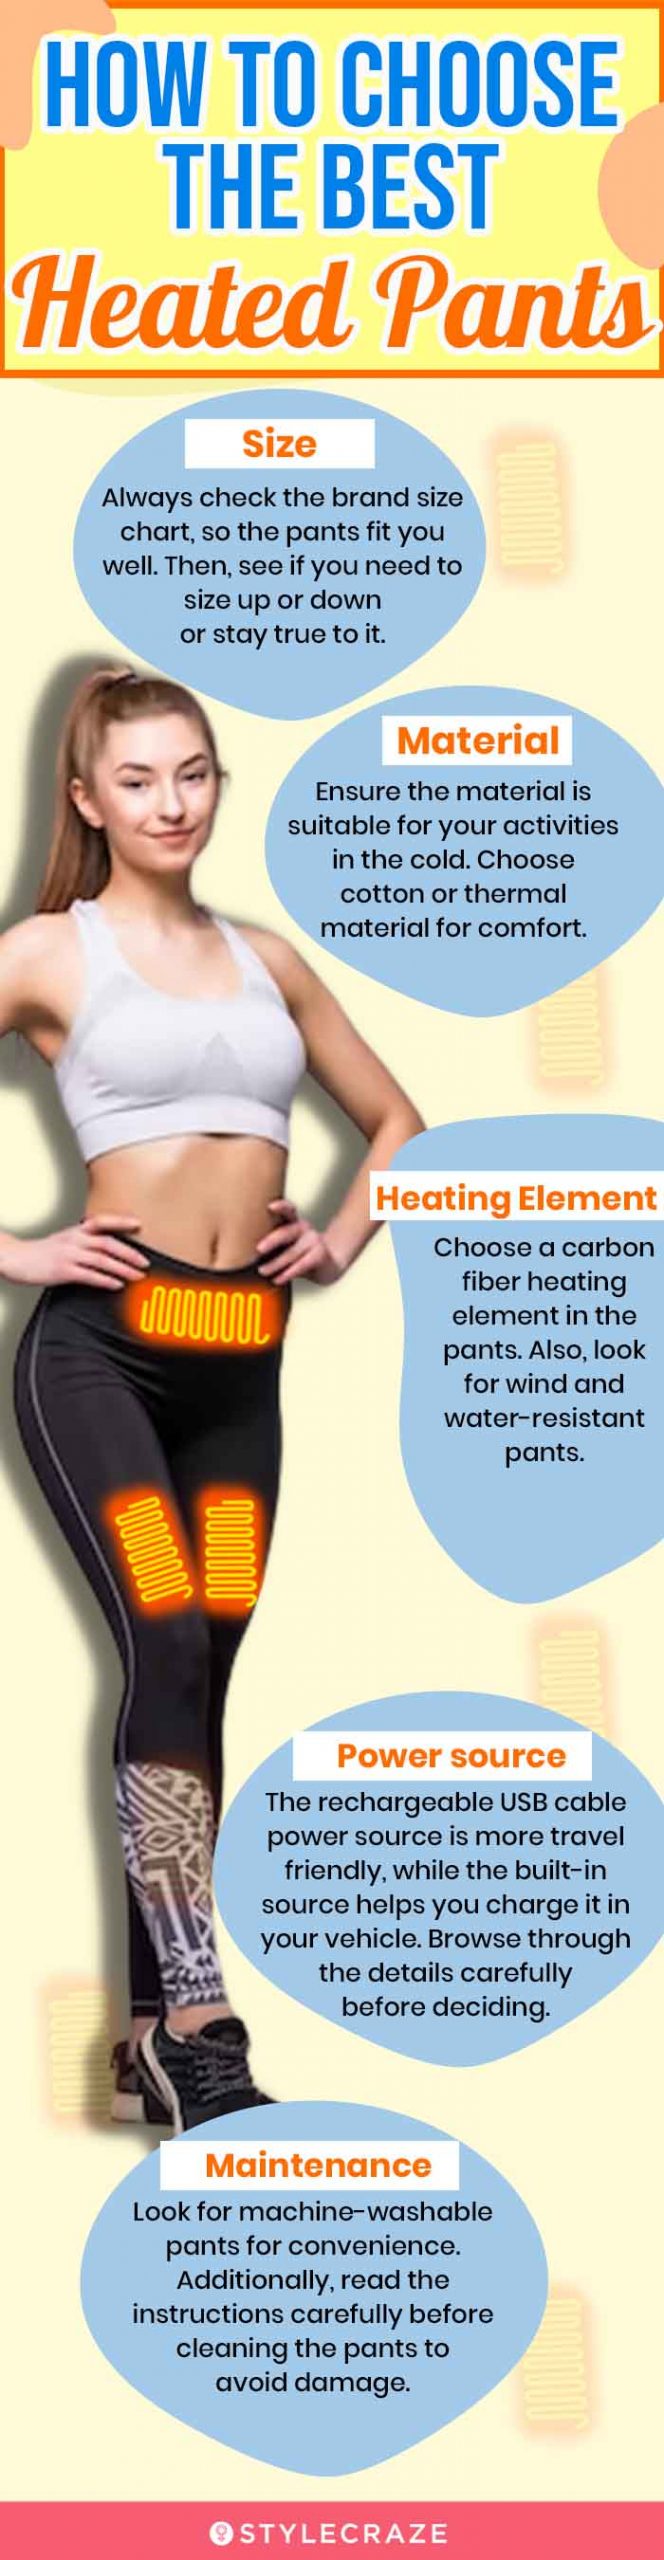 How To Choose The Best Heated Pants (infographic)